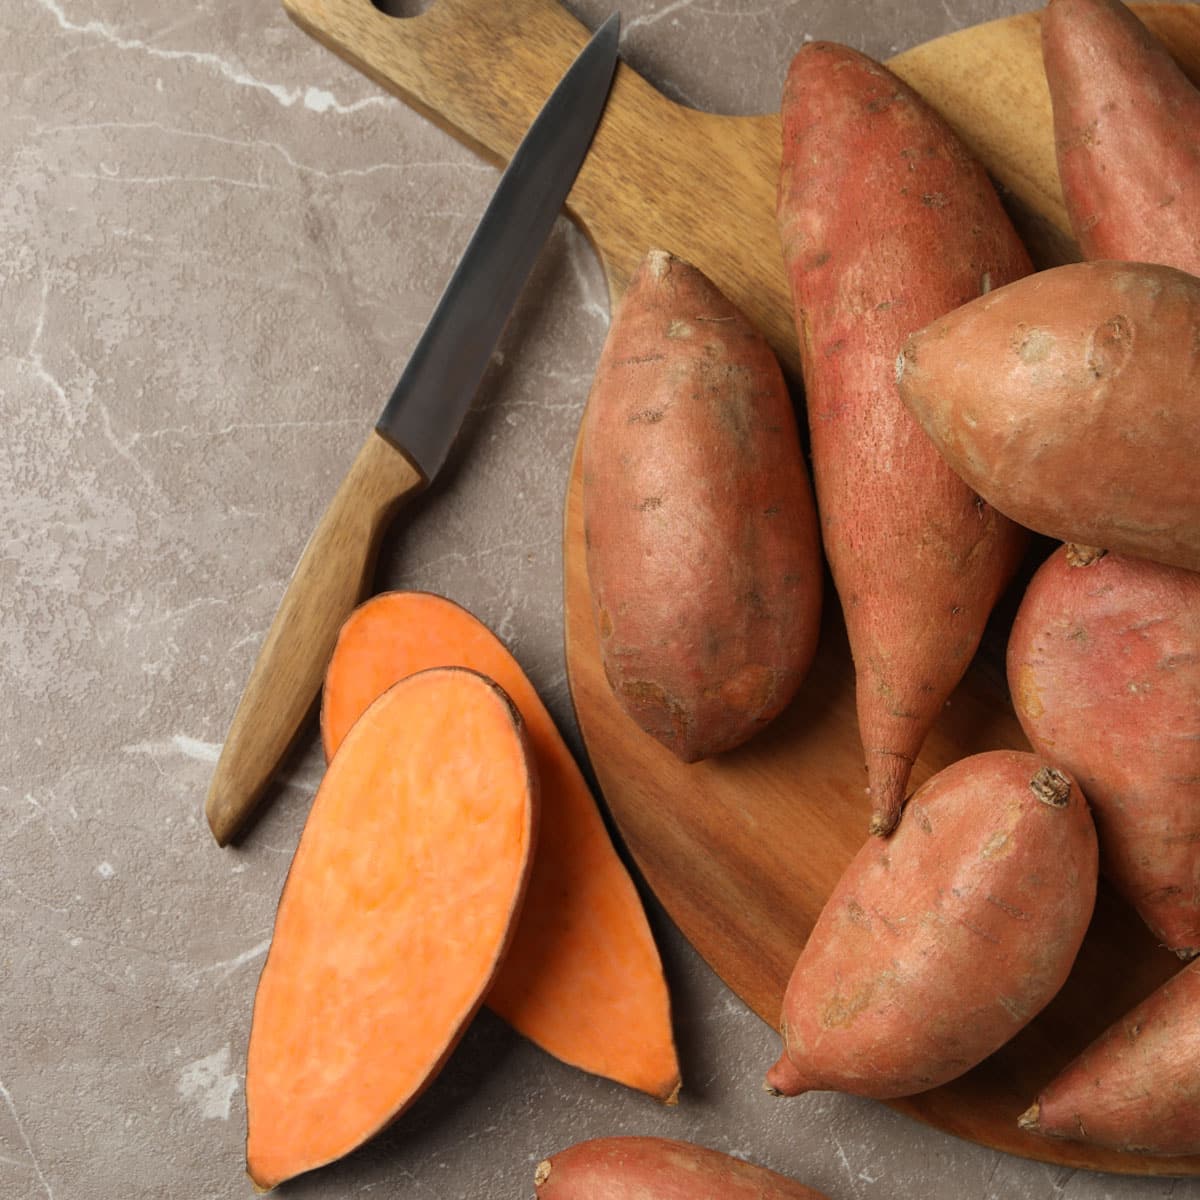 When it comes to cutting sweet potatoes, many people find themselves stumped. The tubers seem to be hard to slice through, even when using a sharp knife. So what's the secret to getting those perfect sweet potato slices?